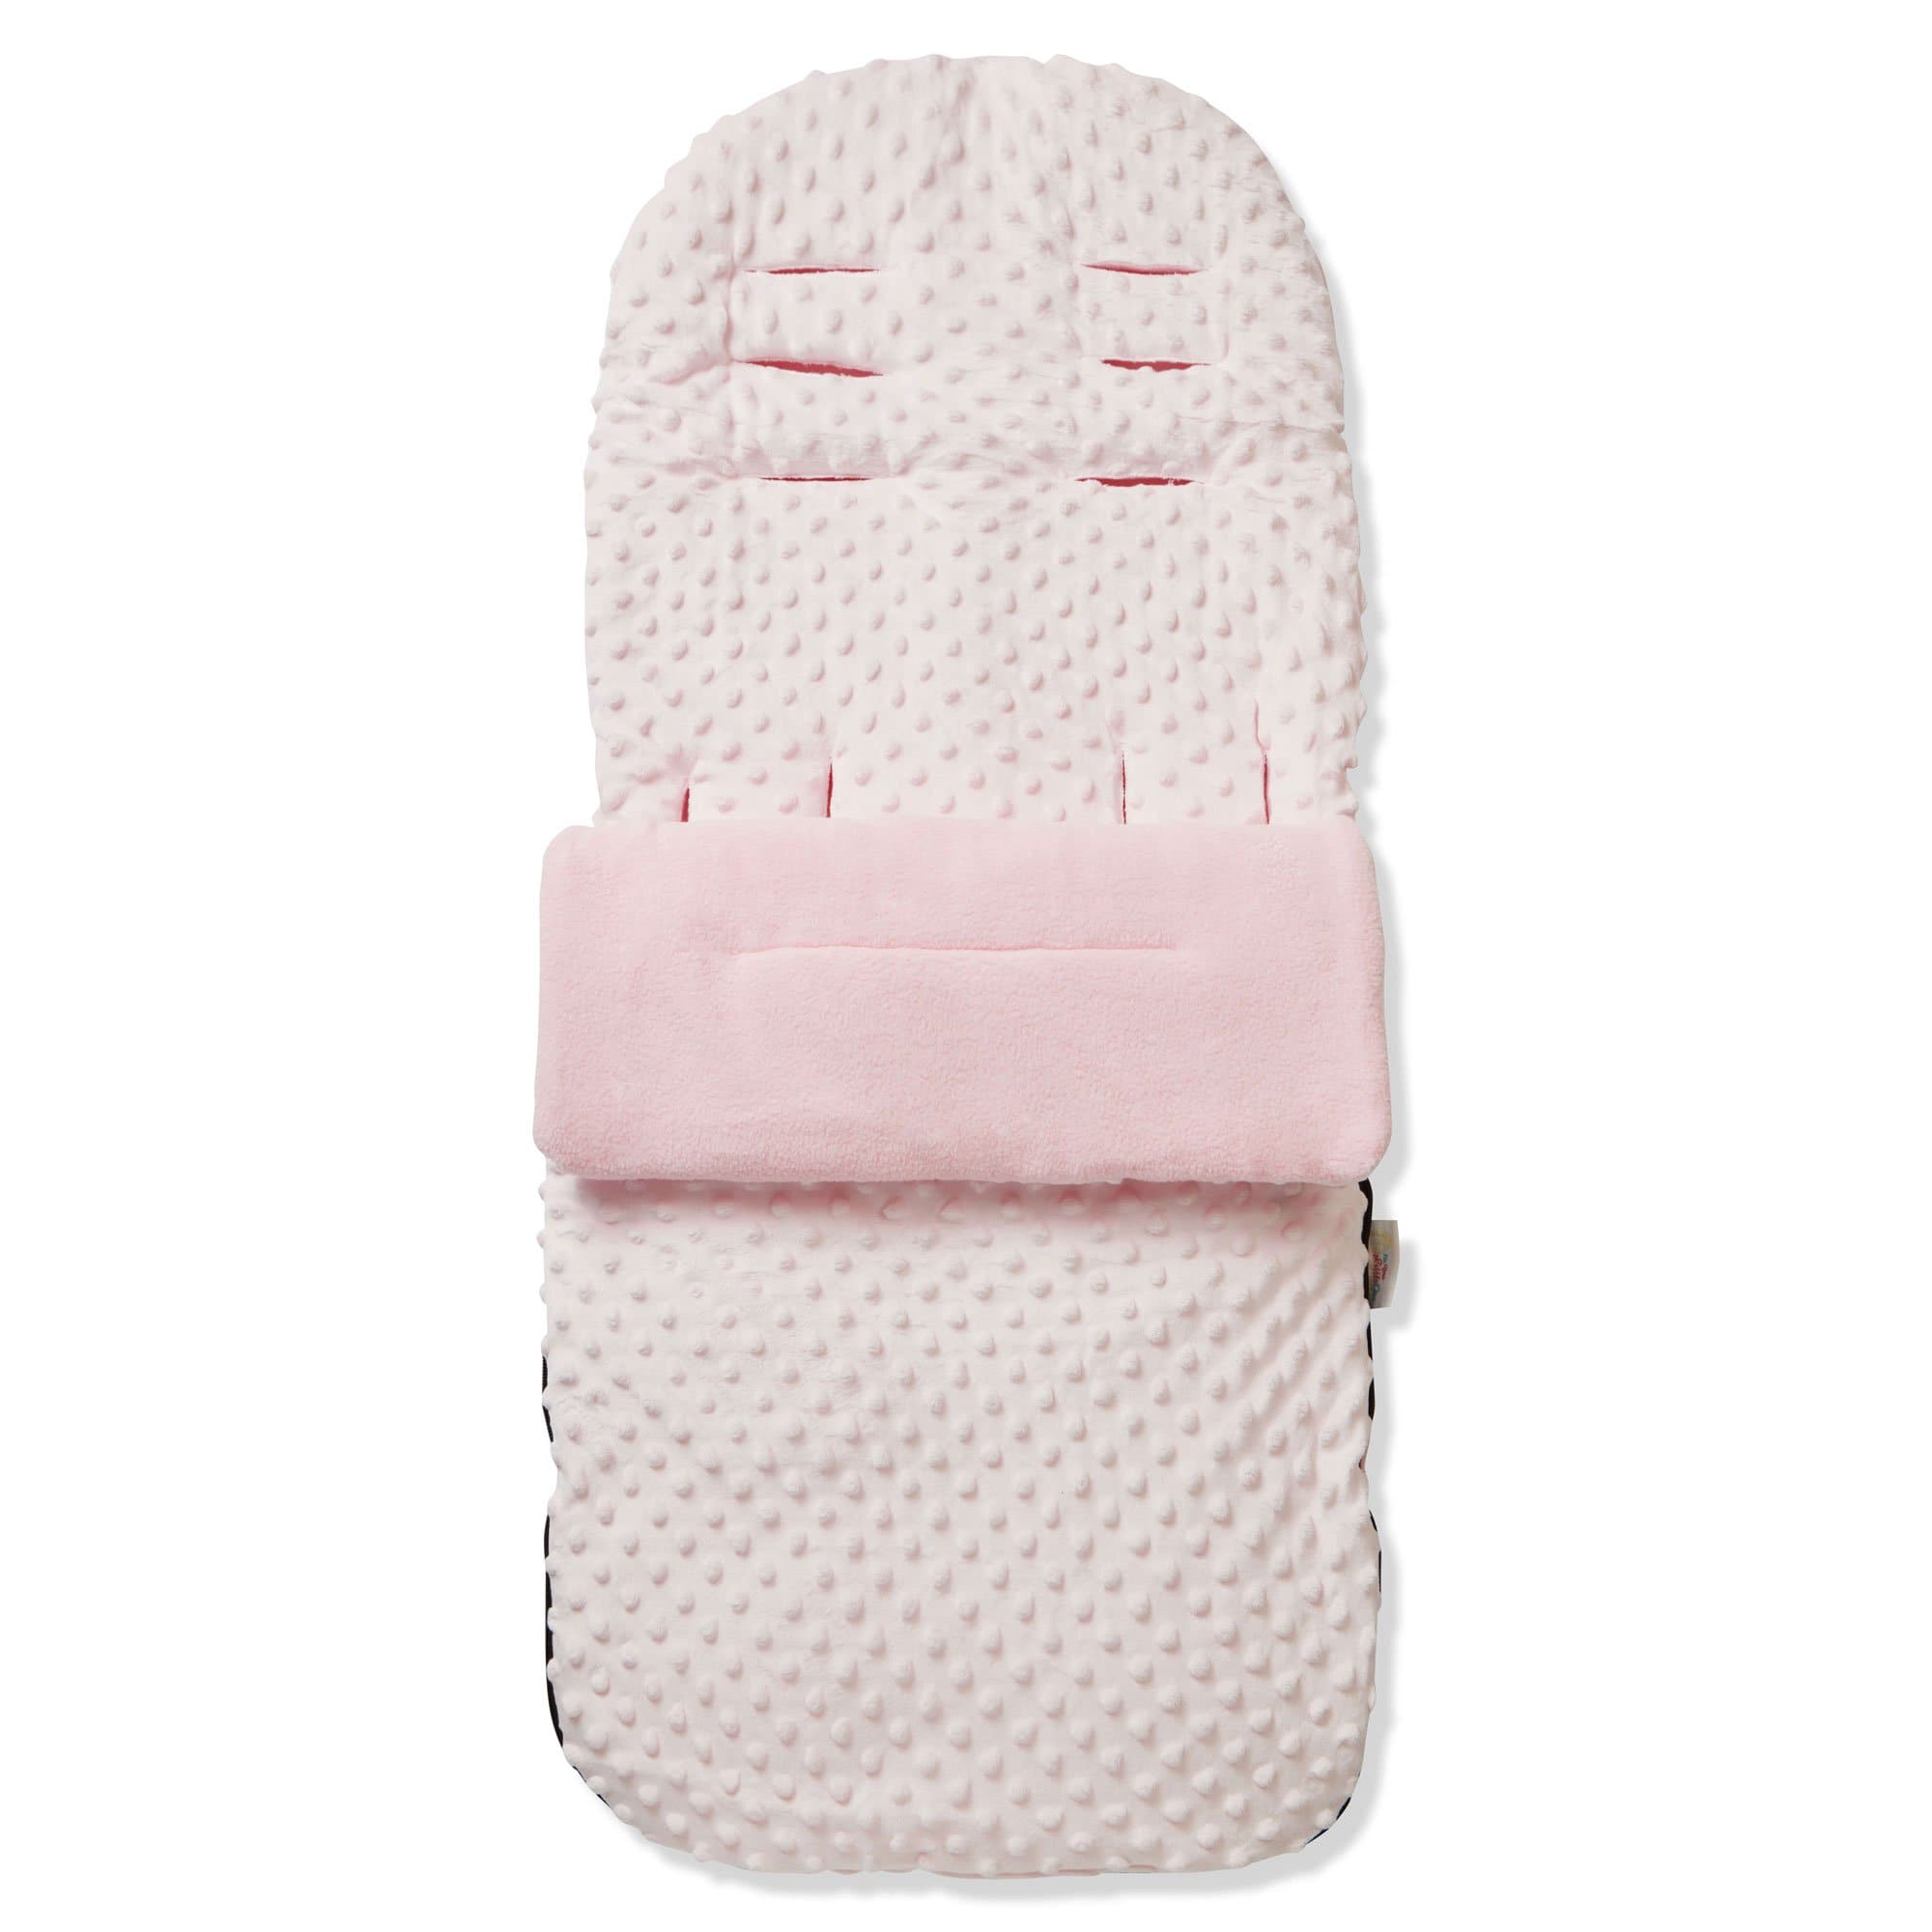 Dimple Footmuff / Cosy Toes Compatible with Easywalker - Pink / Fits All Models | For Your Little One